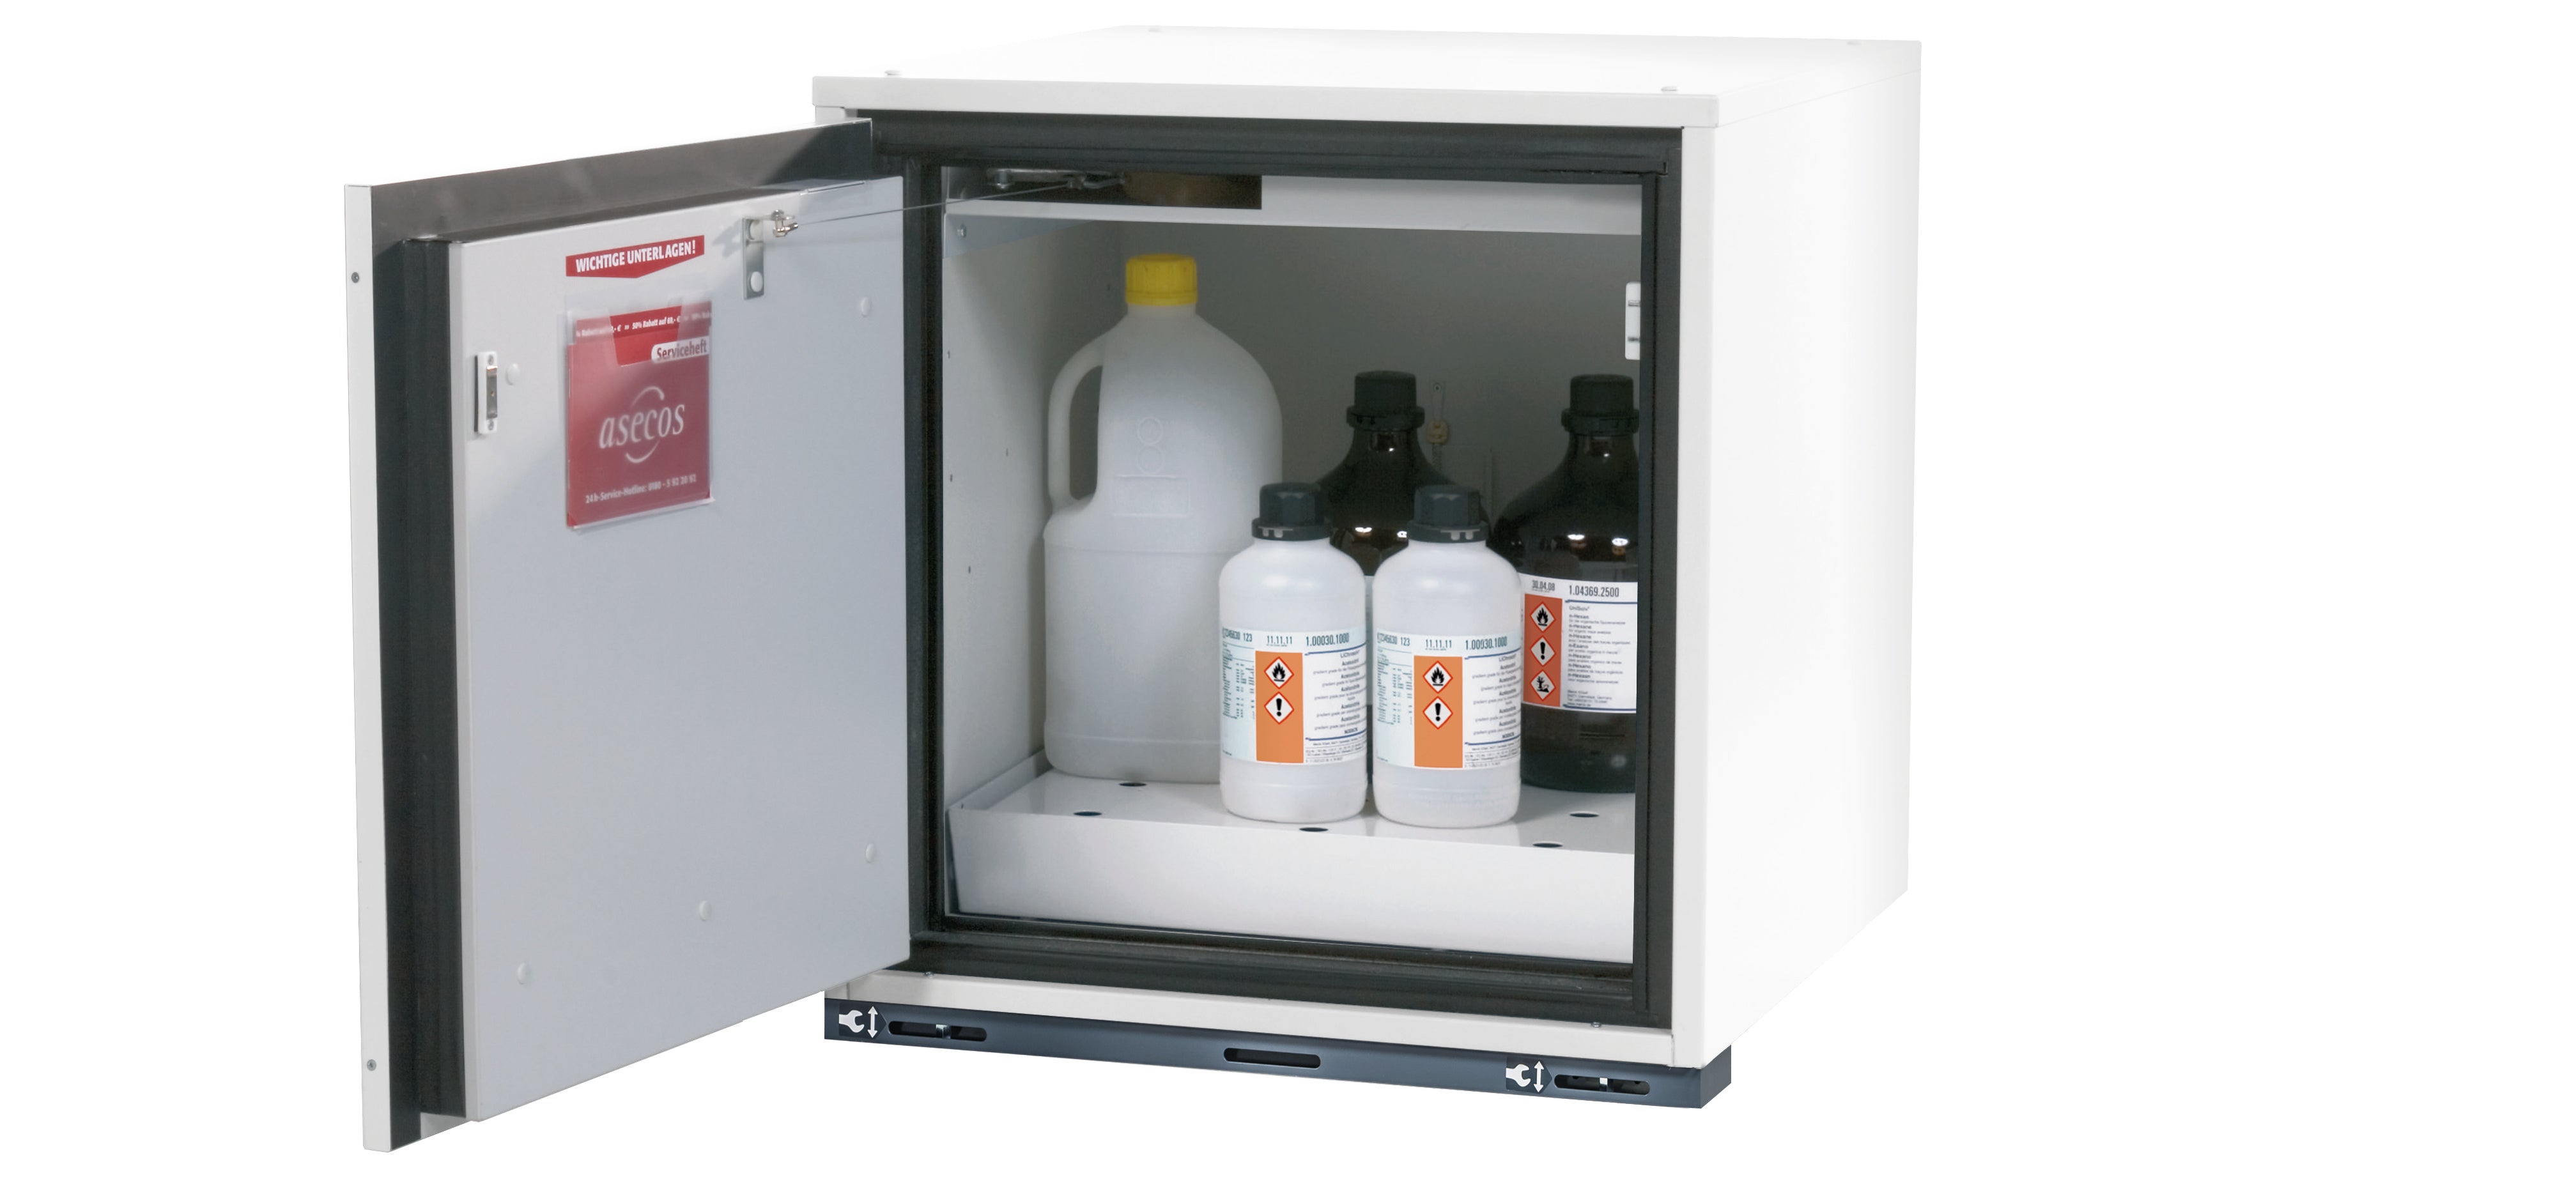 Type 90 safety base cabinet UB-T-90 model UB90.060.059.050.T in laboratory white (similar to RAL 9016) with 1x perforated sheet insert standard (sheet steel)